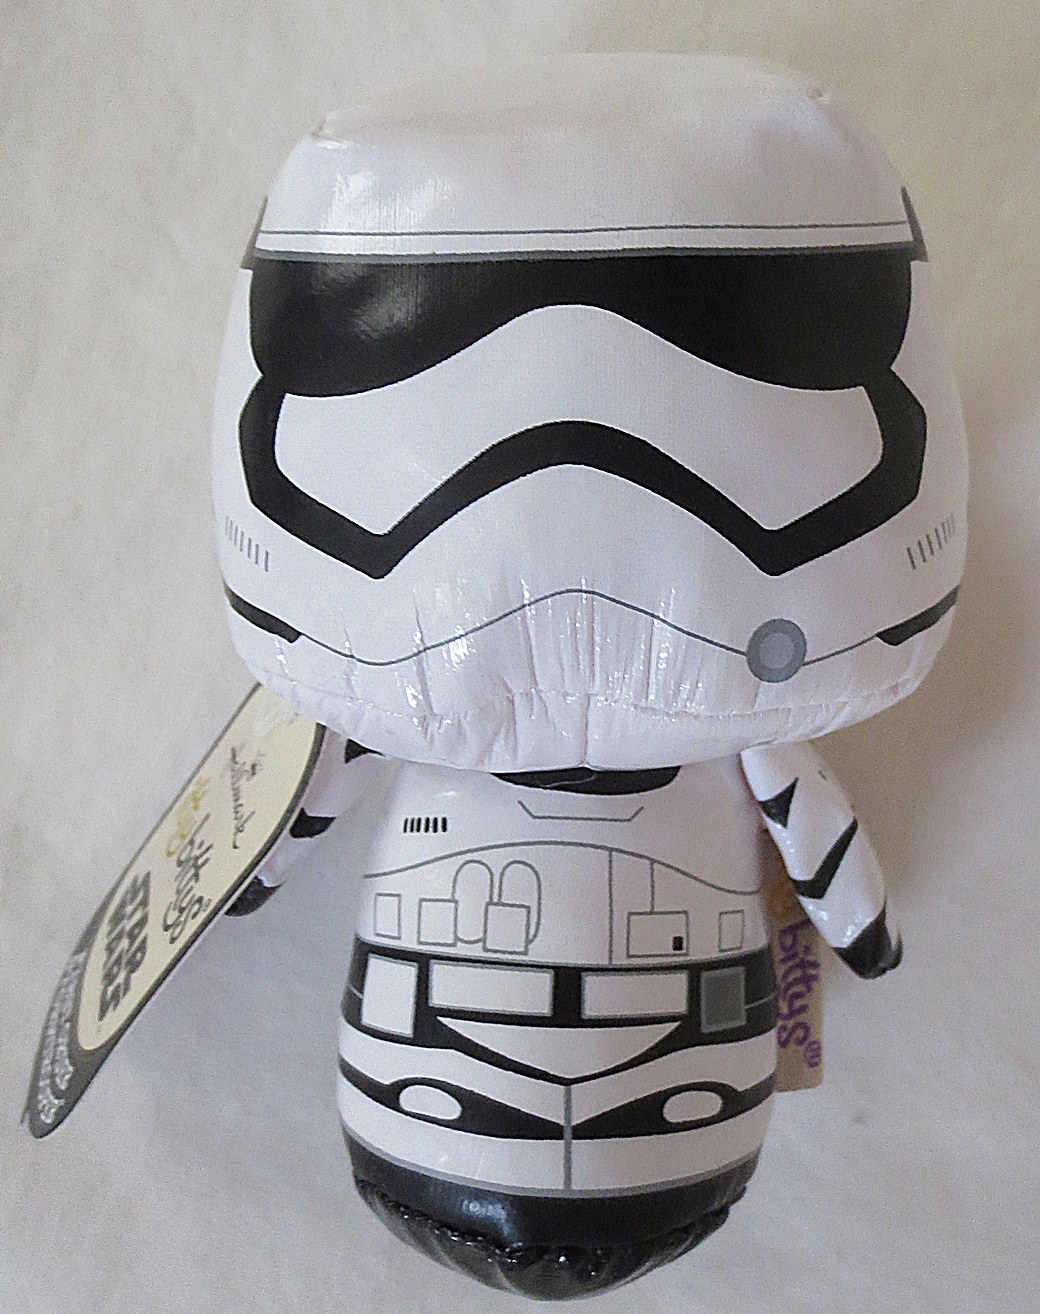 Primary image for Hallmark Itty Bittys Star Wars First Order Stormtrooper Plush